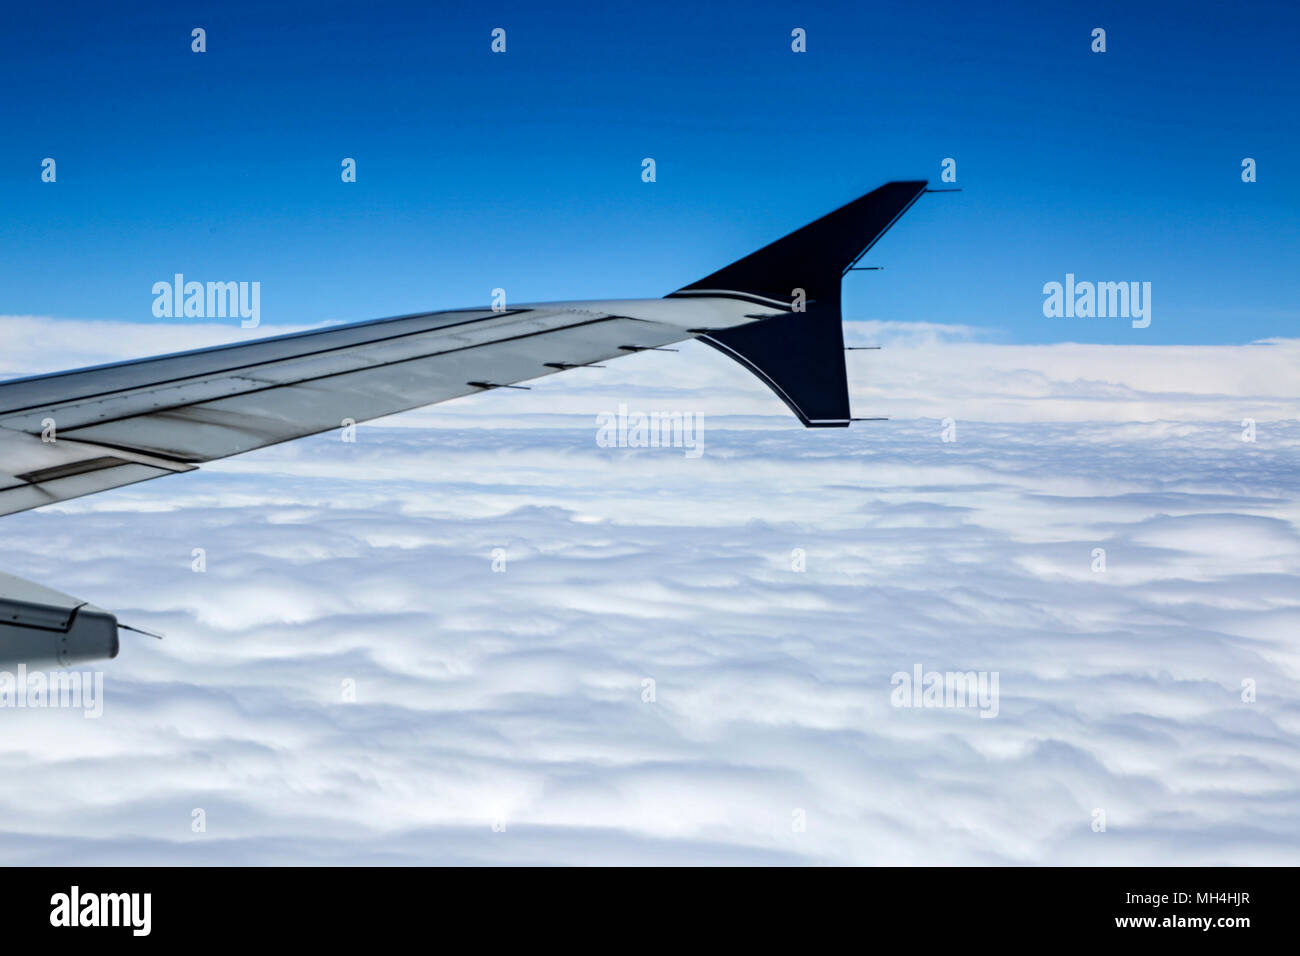 A Commercial Plane in Flight Over the Clouds Stock Photo